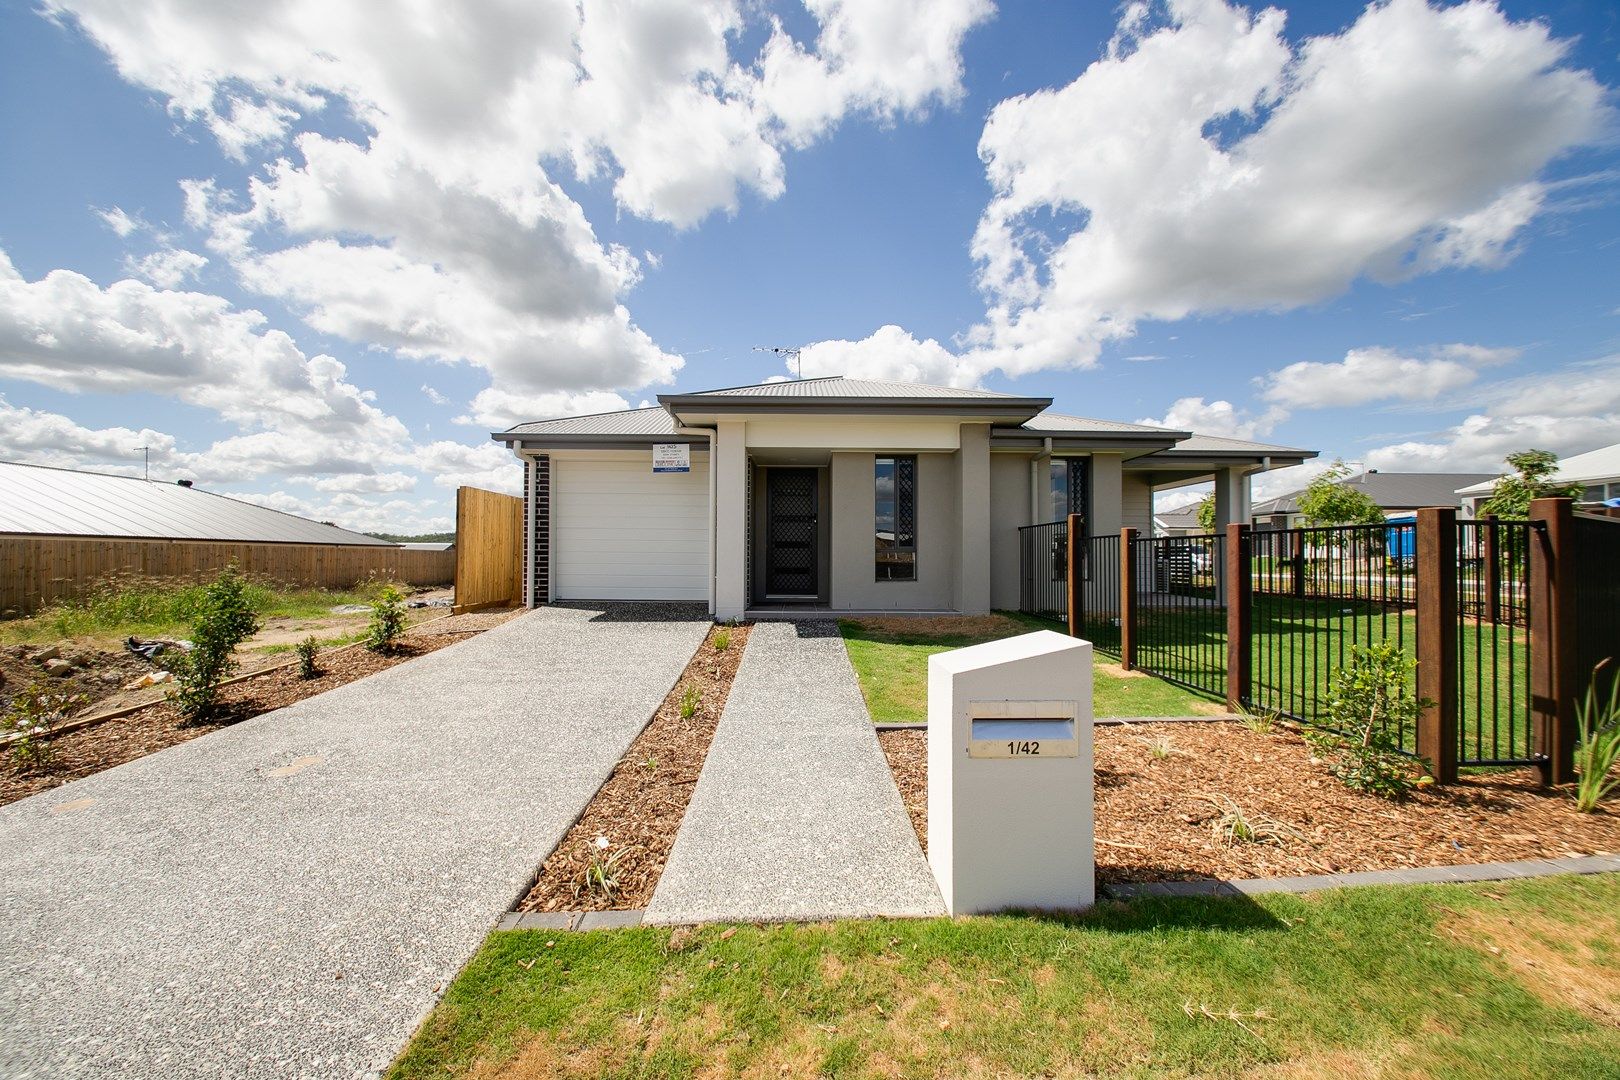 3 bedrooms House in 1/42 Homevale Drive SOUTH RIPLEY QLD, 4306